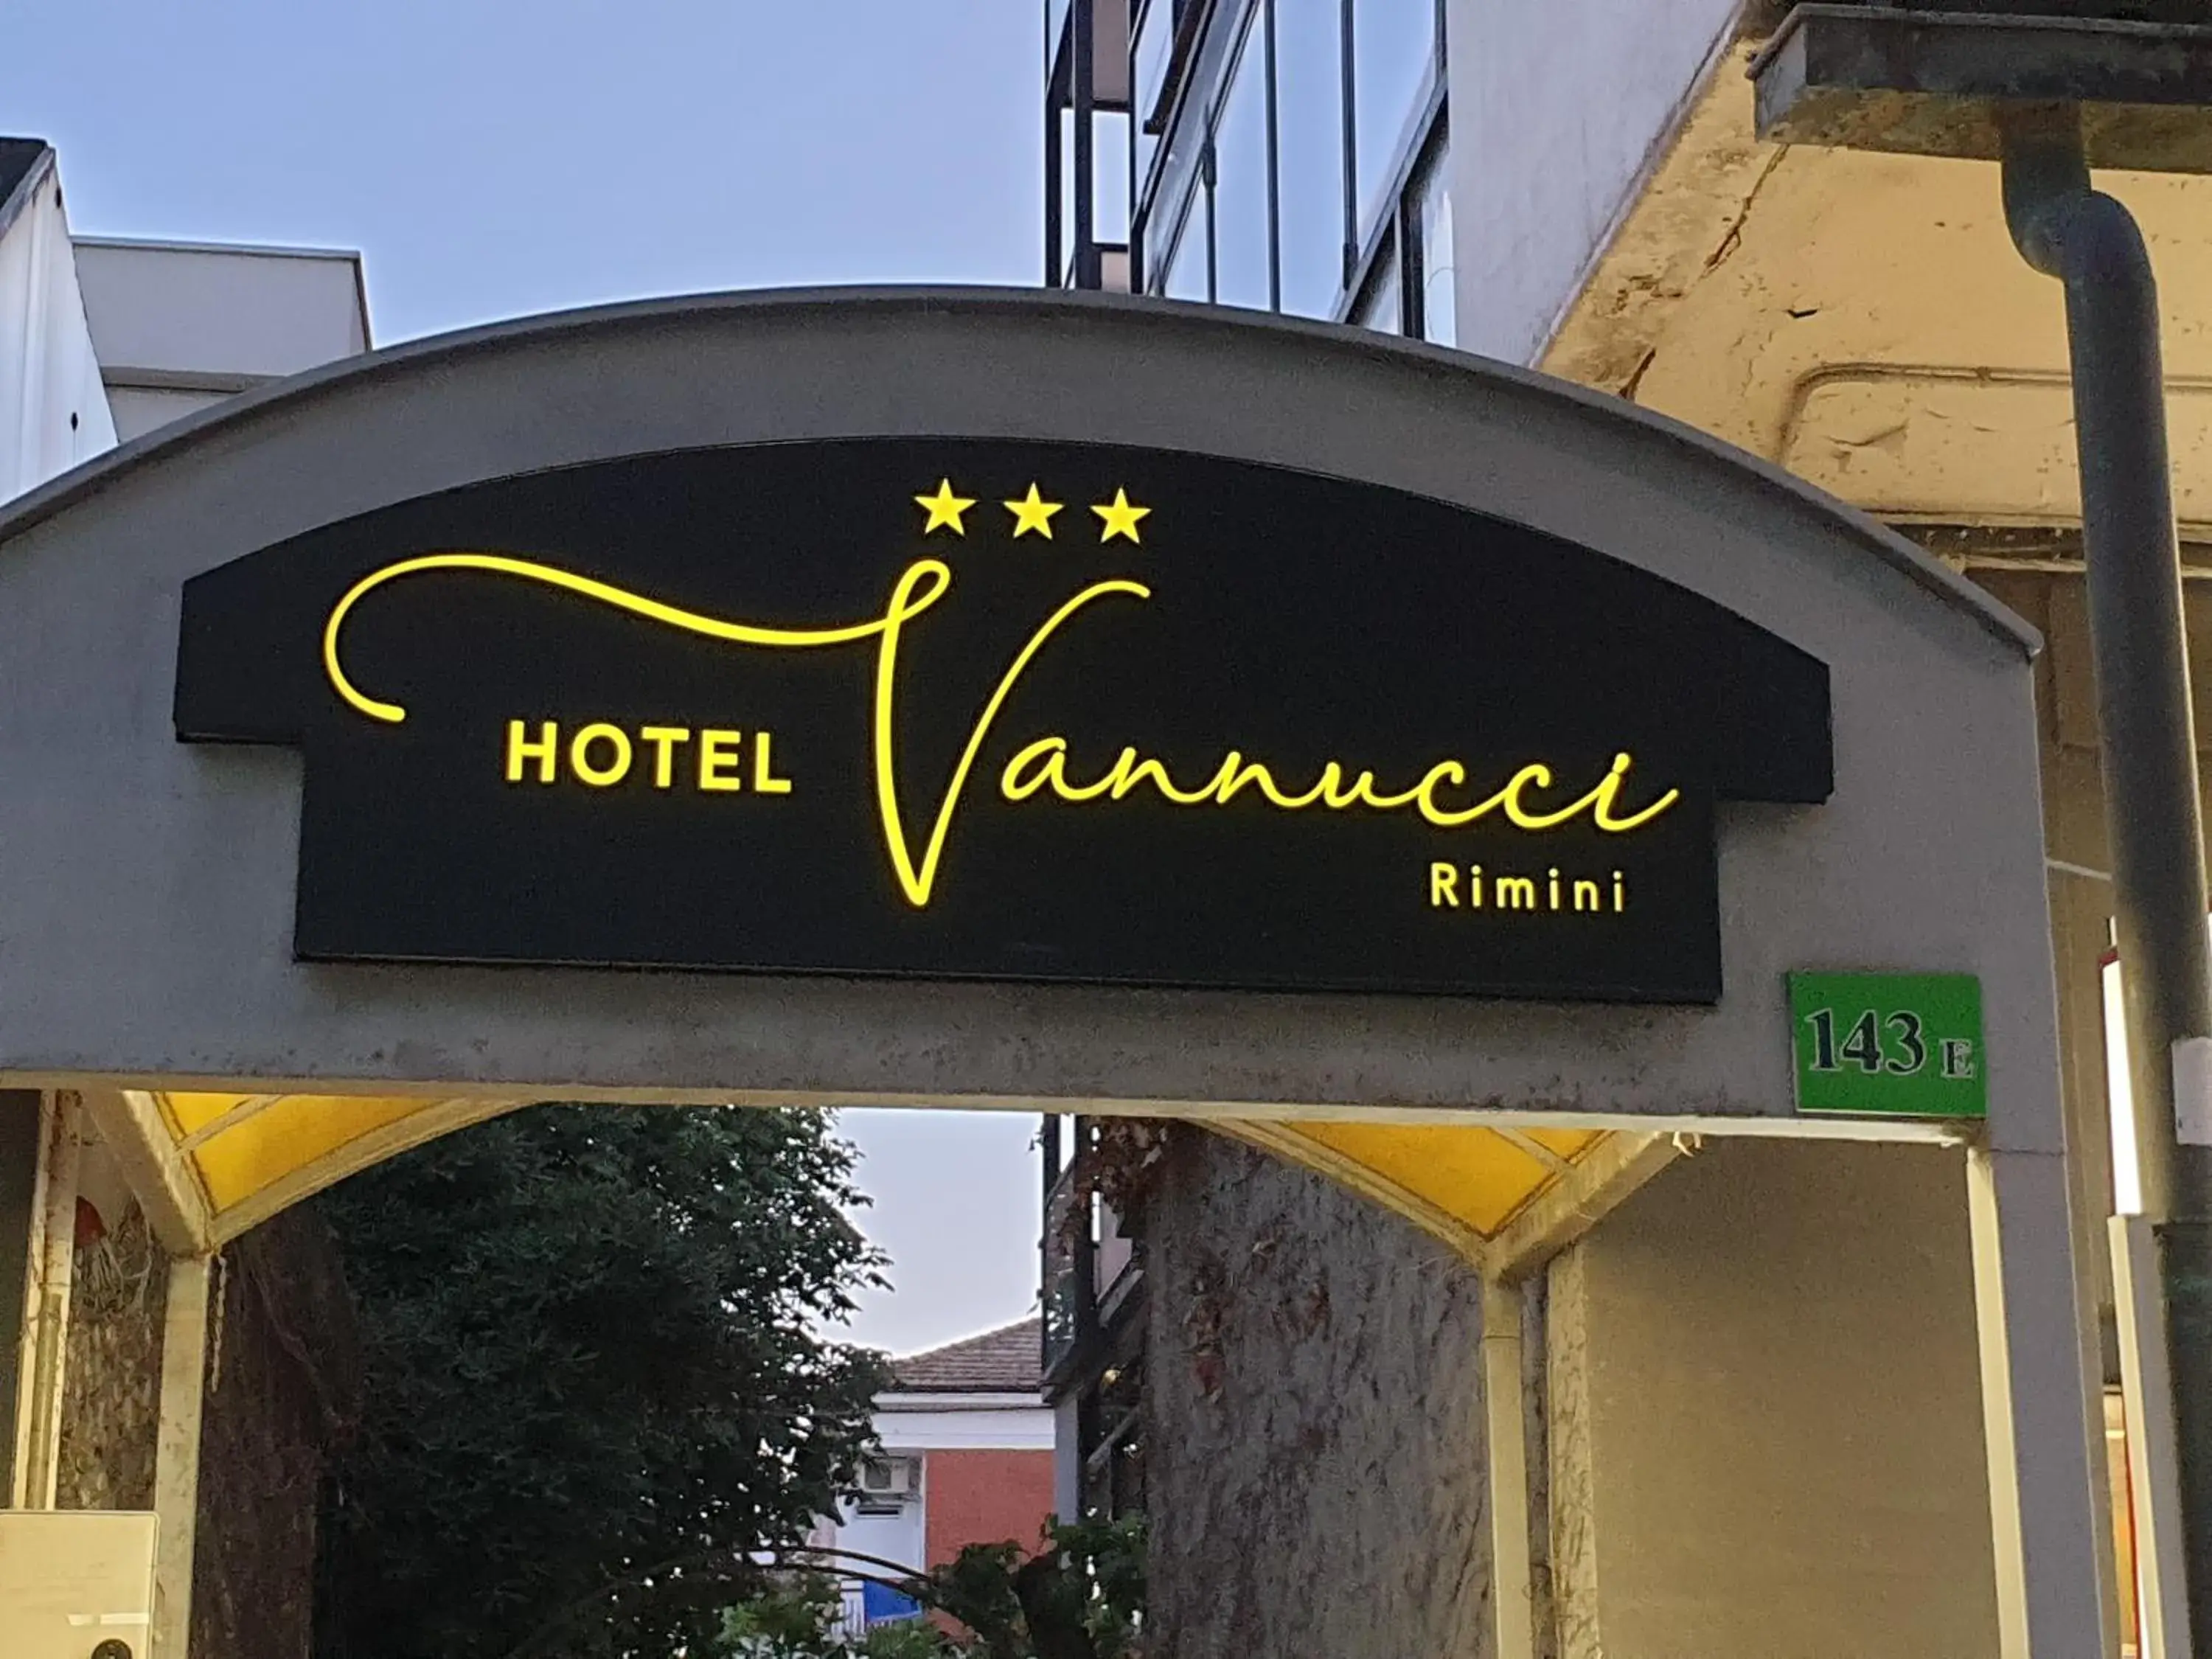 Property logo or sign in Hotel Vannucci